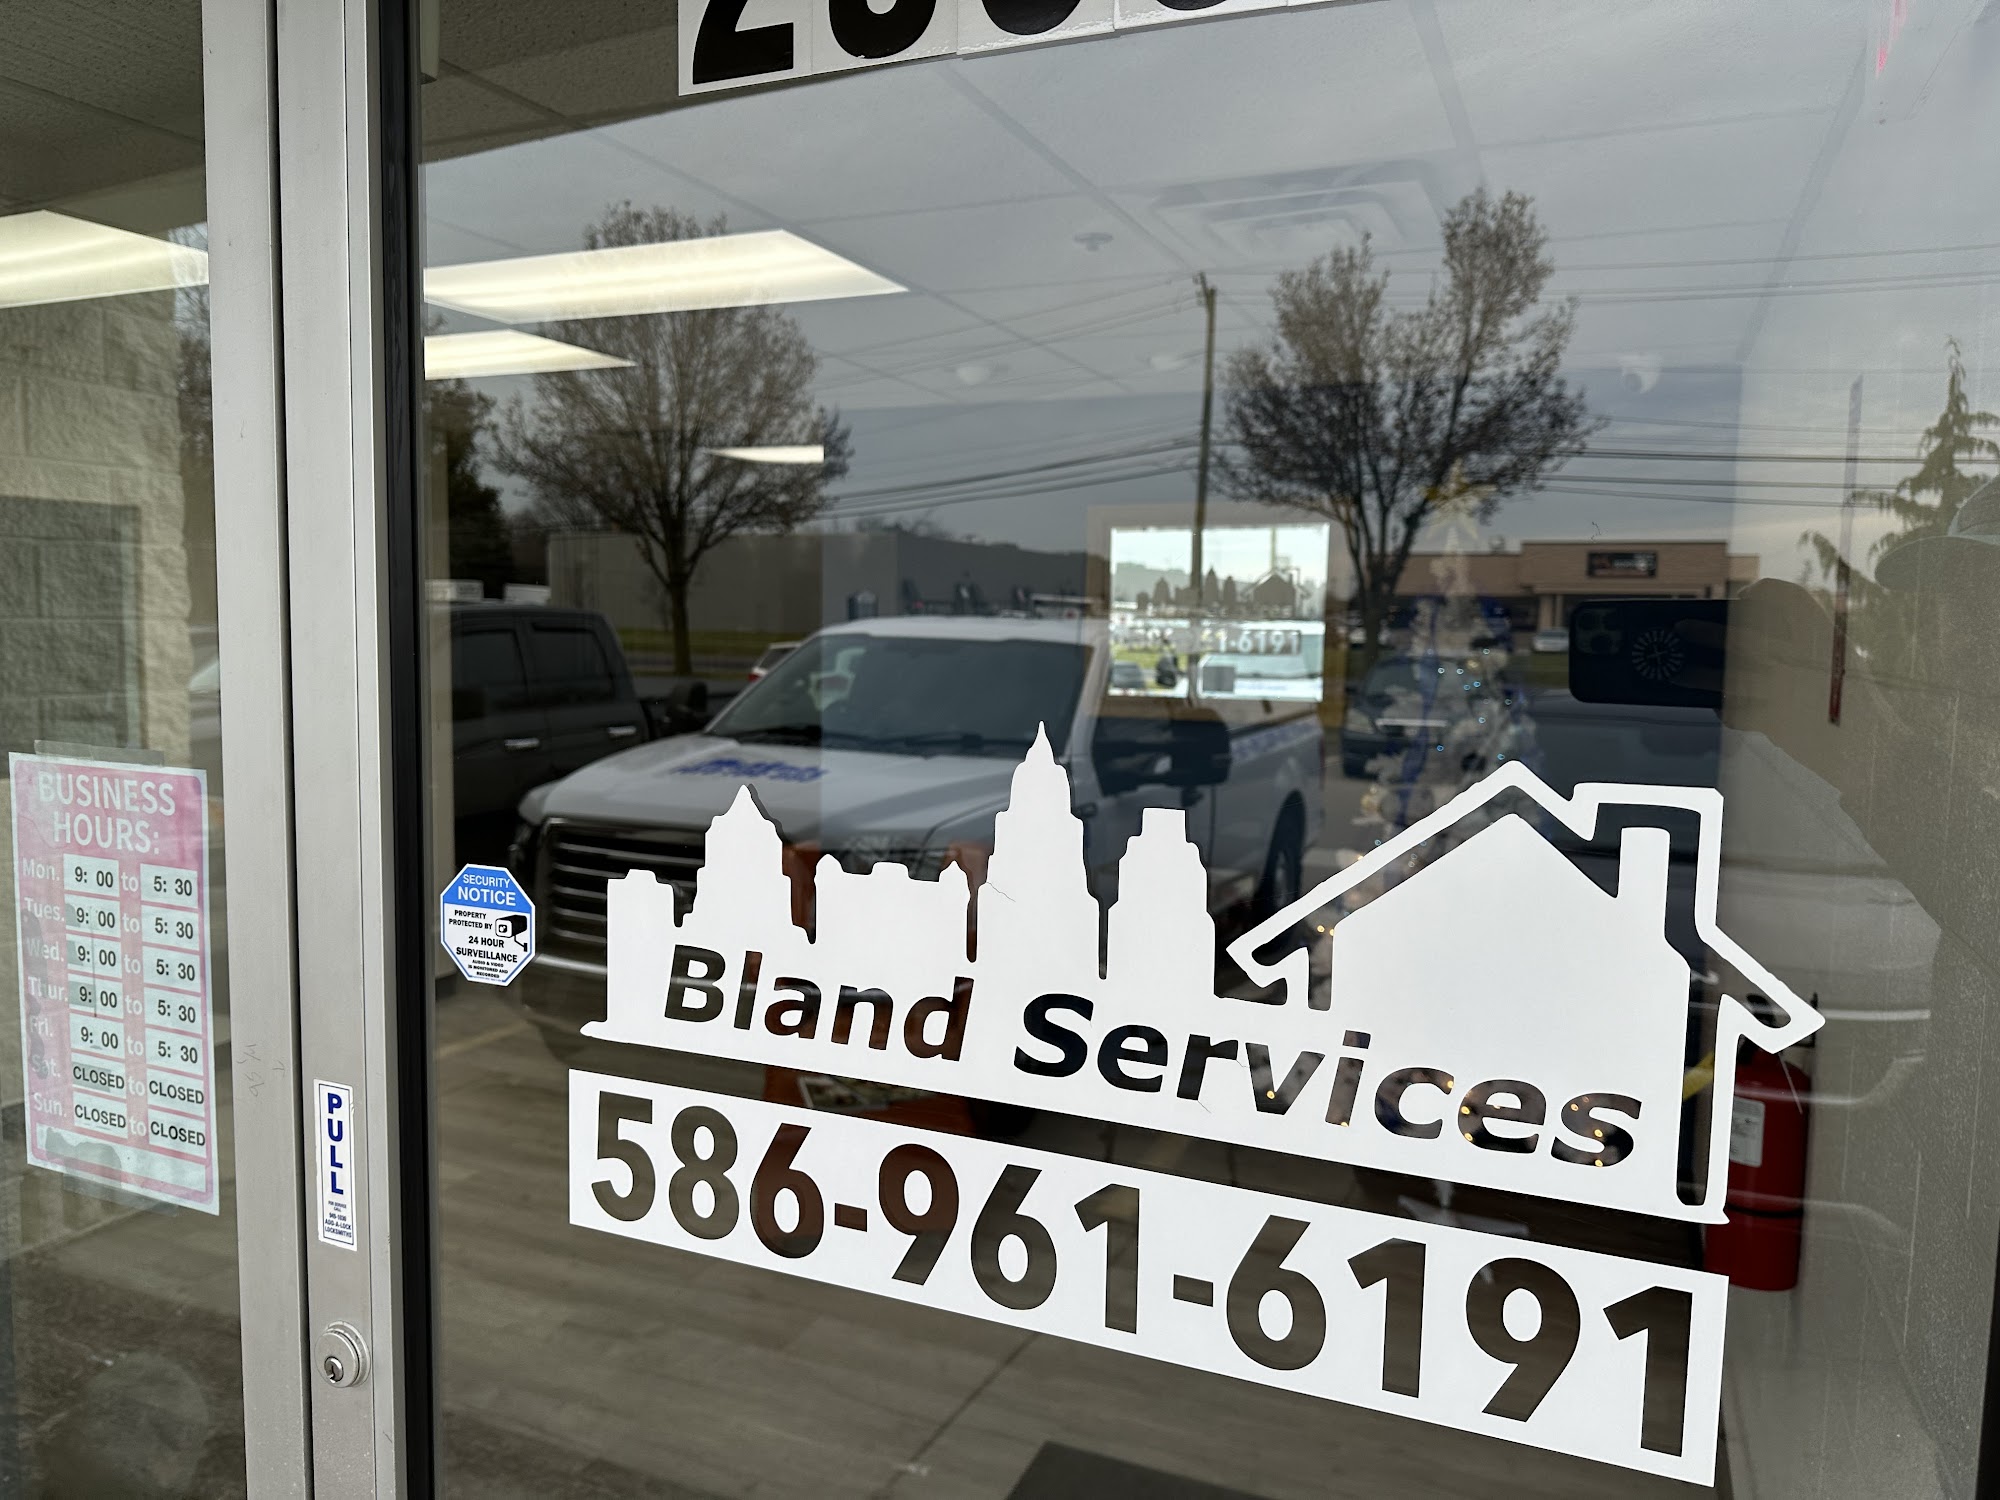 A1 Bland Services LLC Window Cleaning, Power Washing, Gutter Cleaning, Air Duct Cleaning